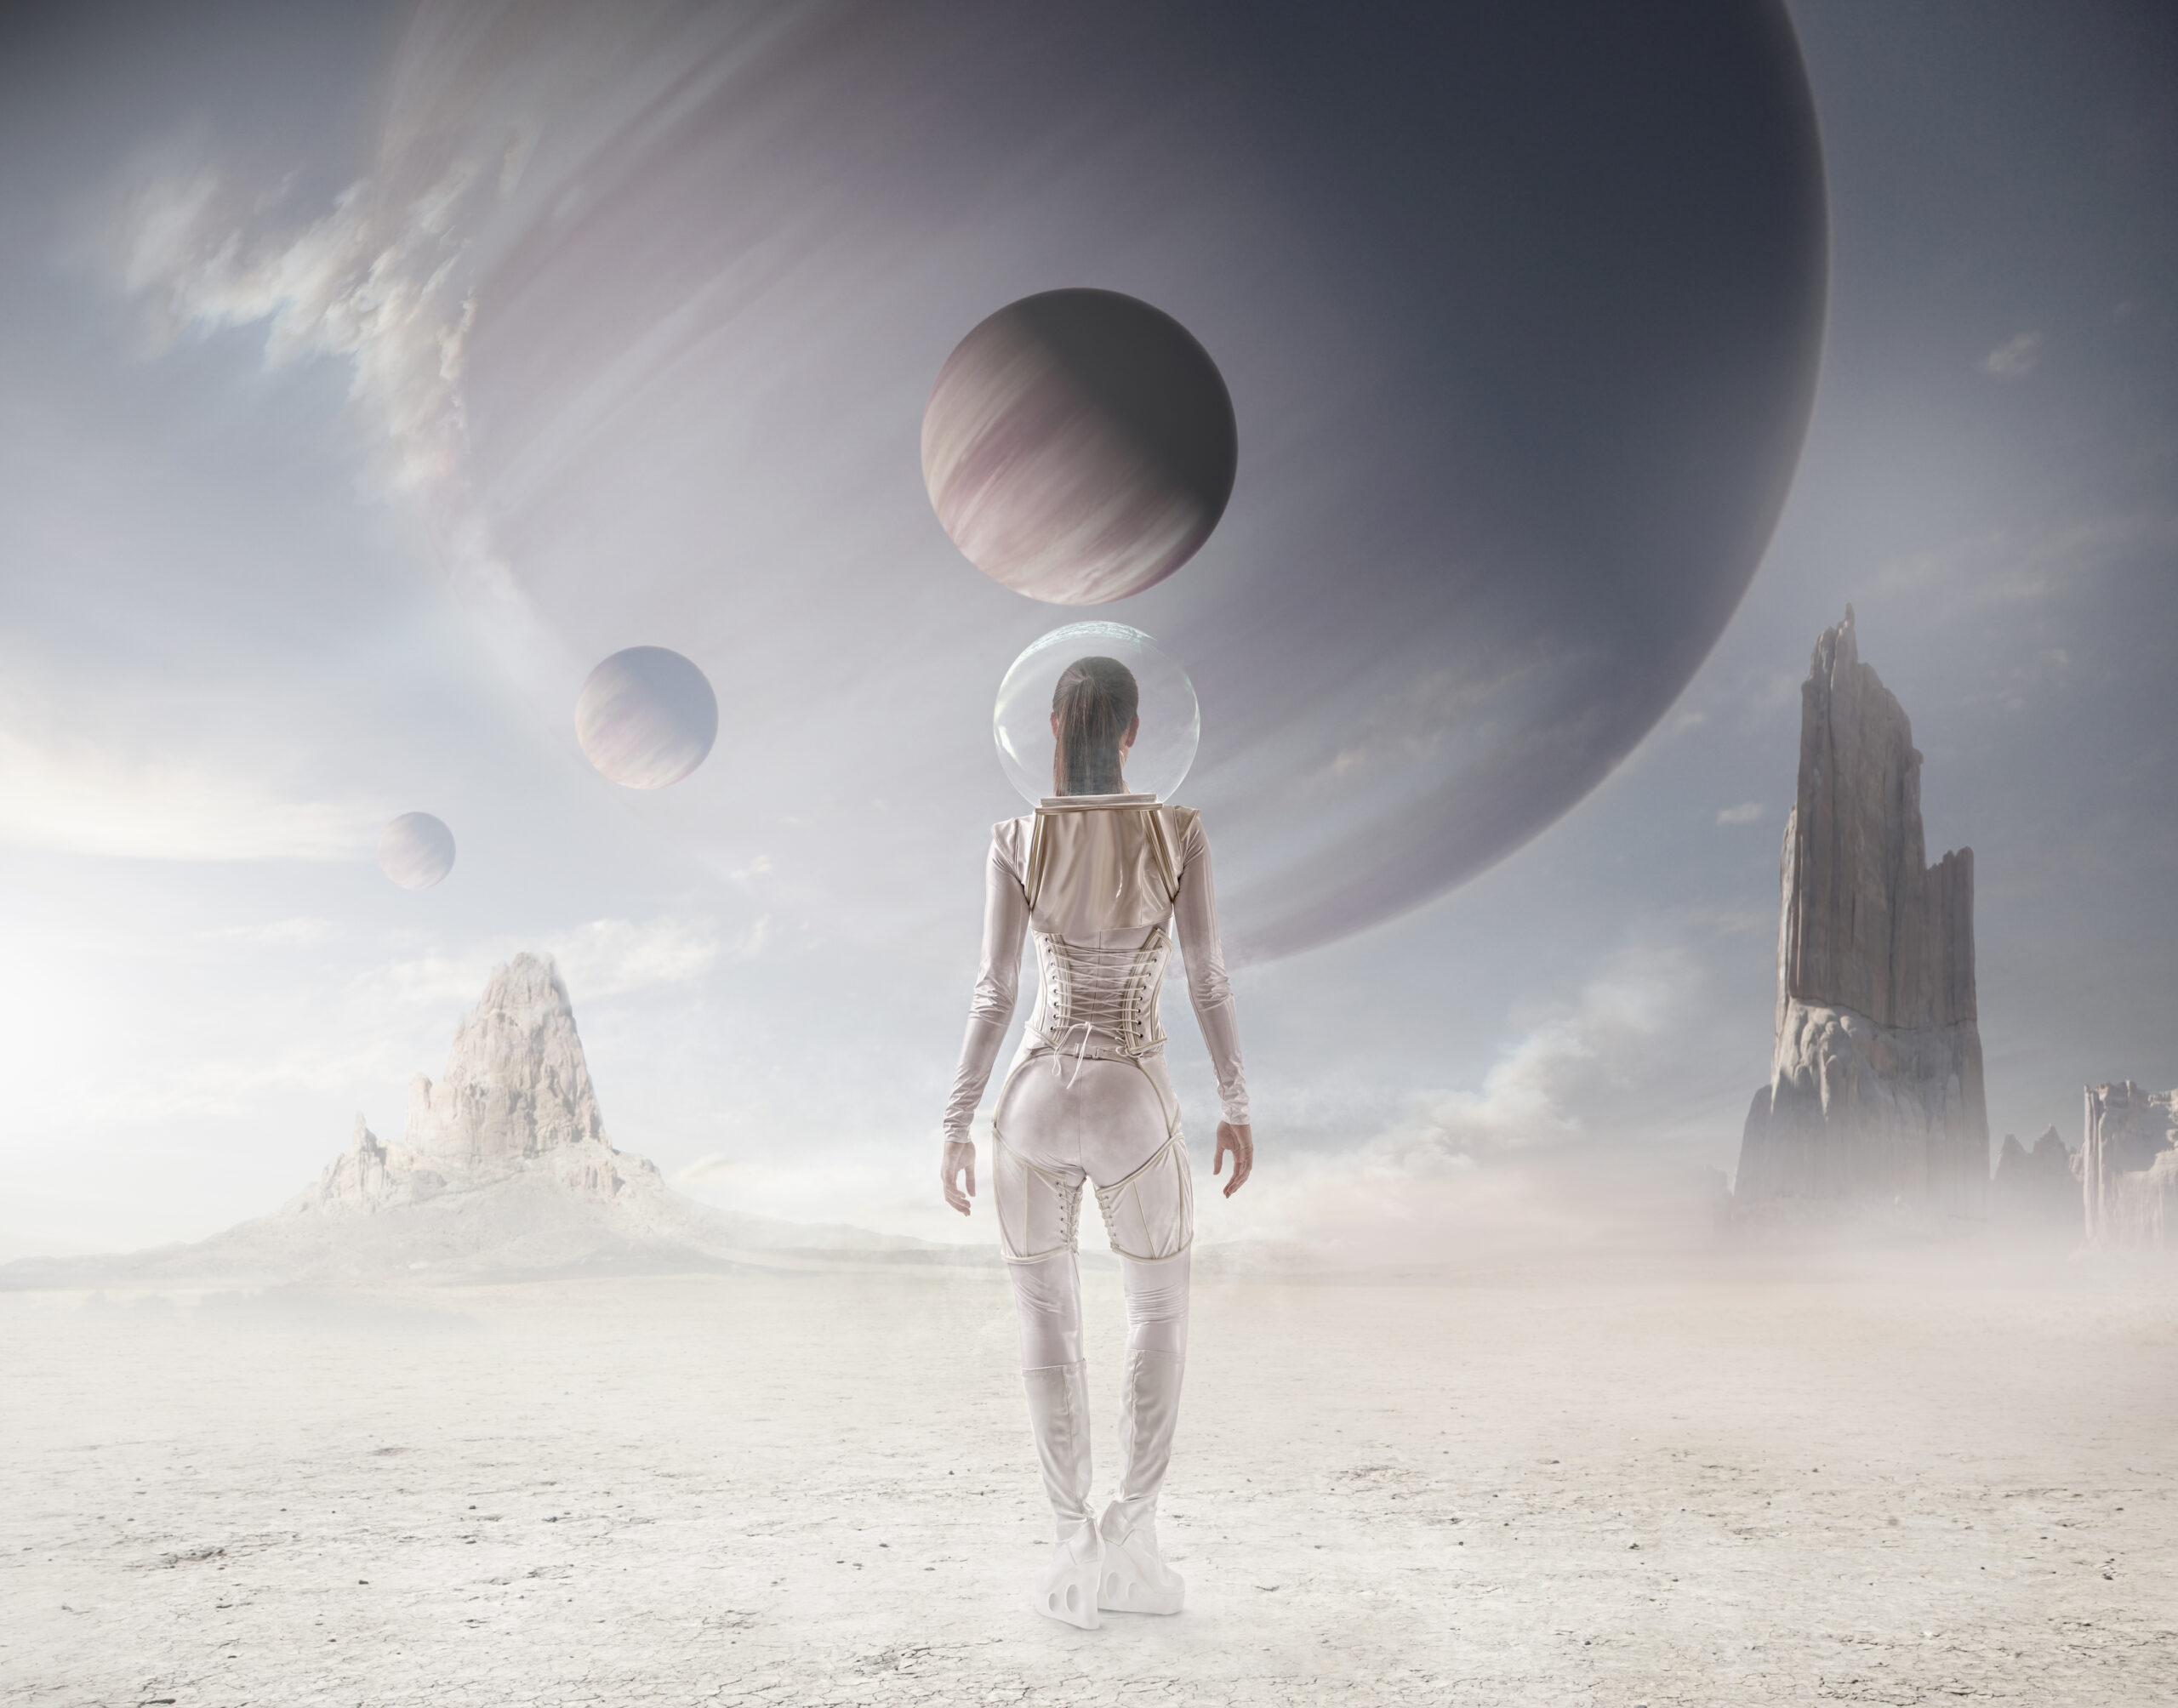 Futuristic Pacific Islander woman watching planets in sky